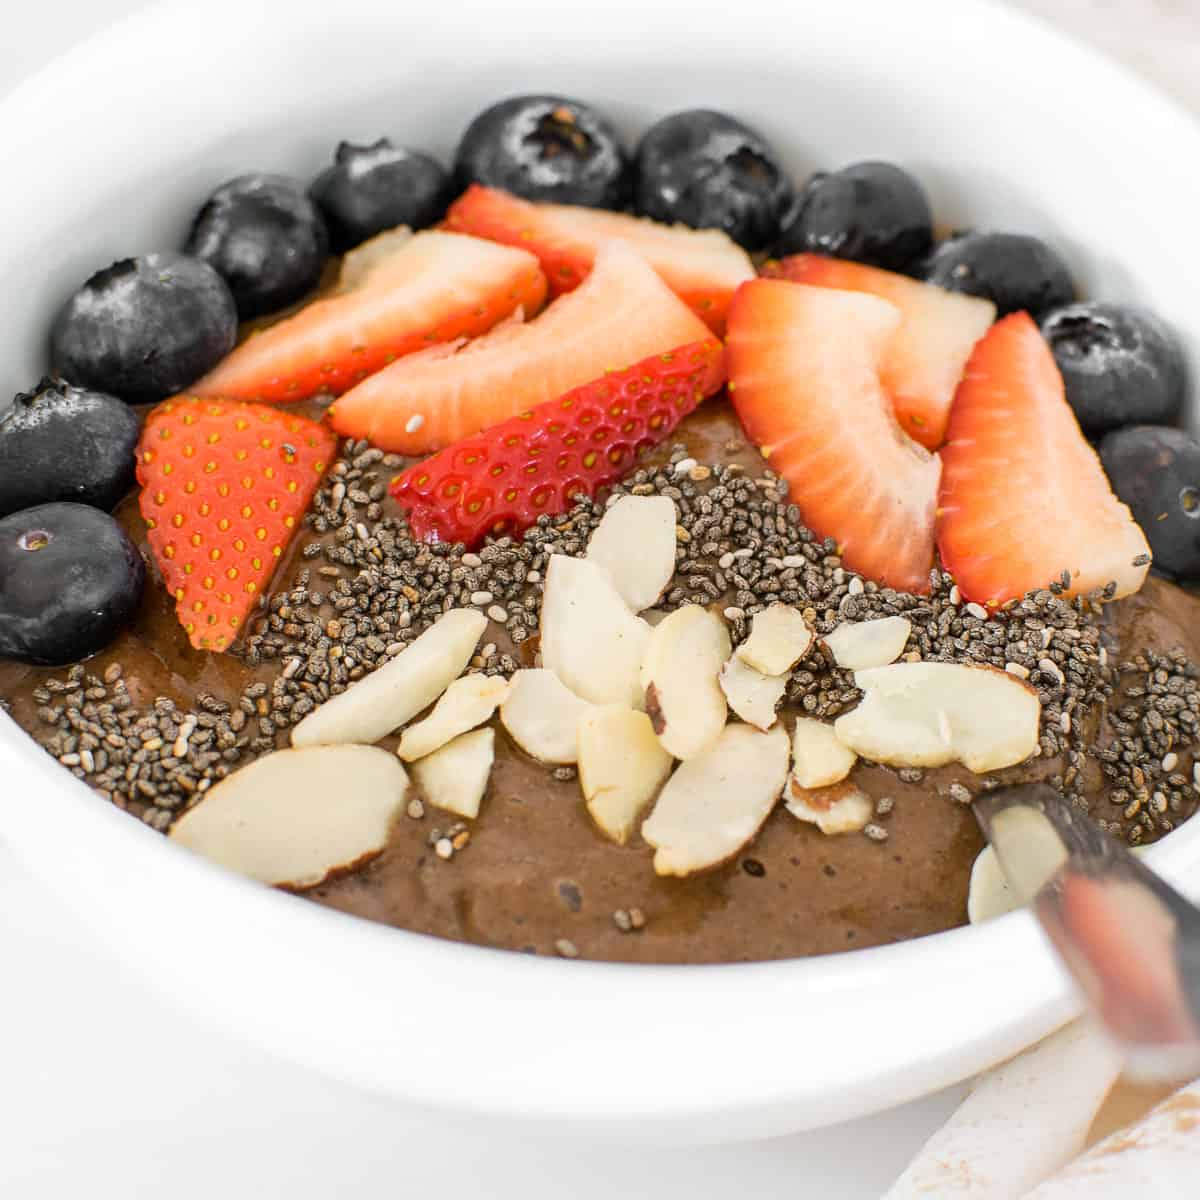 a close up view of served coffee smoothie bowl.